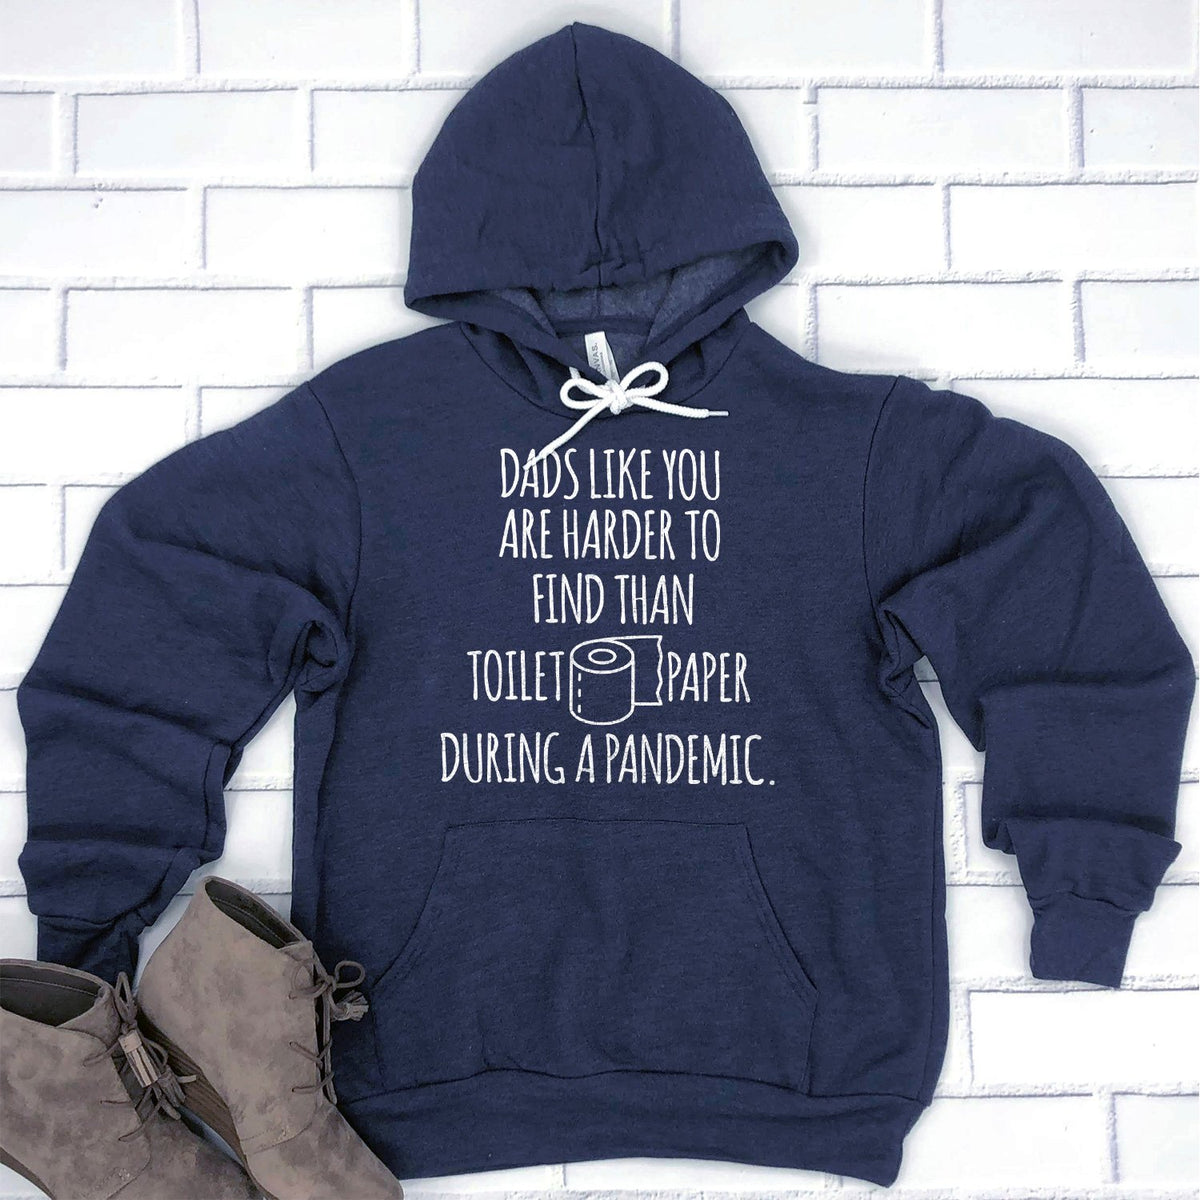 Dads Like You Are Harder to Find Than Toilet Paper During A Pandemic - Hoodie Sweatshirt